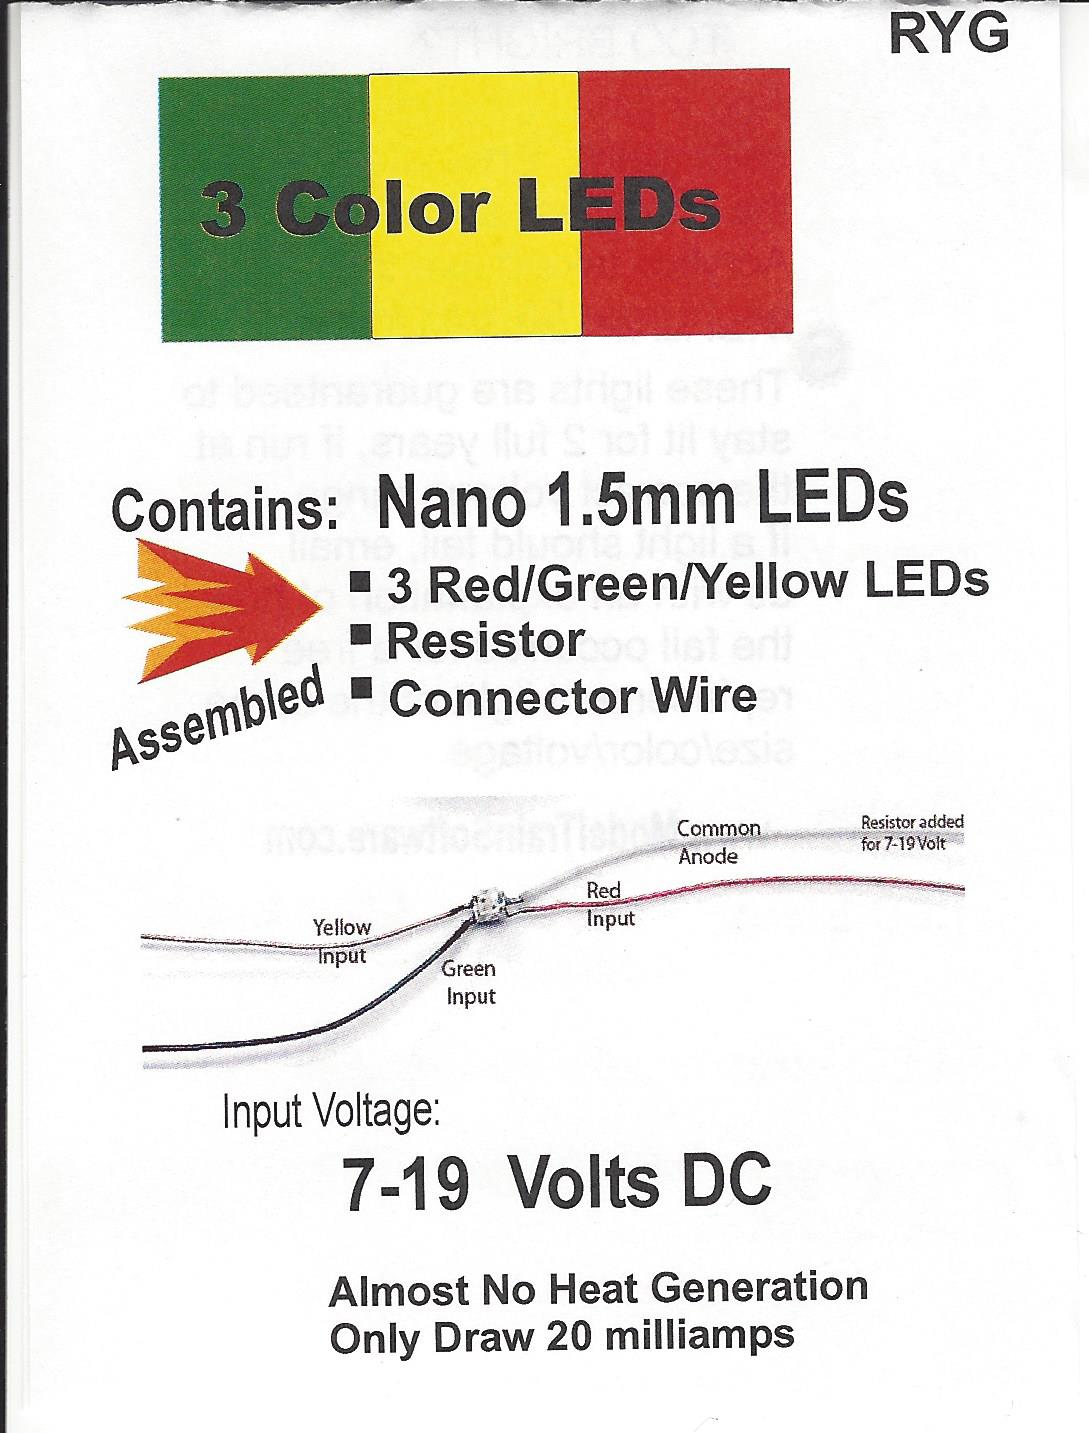 RYG red,yellow, & green Nano LEDs for track side towers by Evan Designs